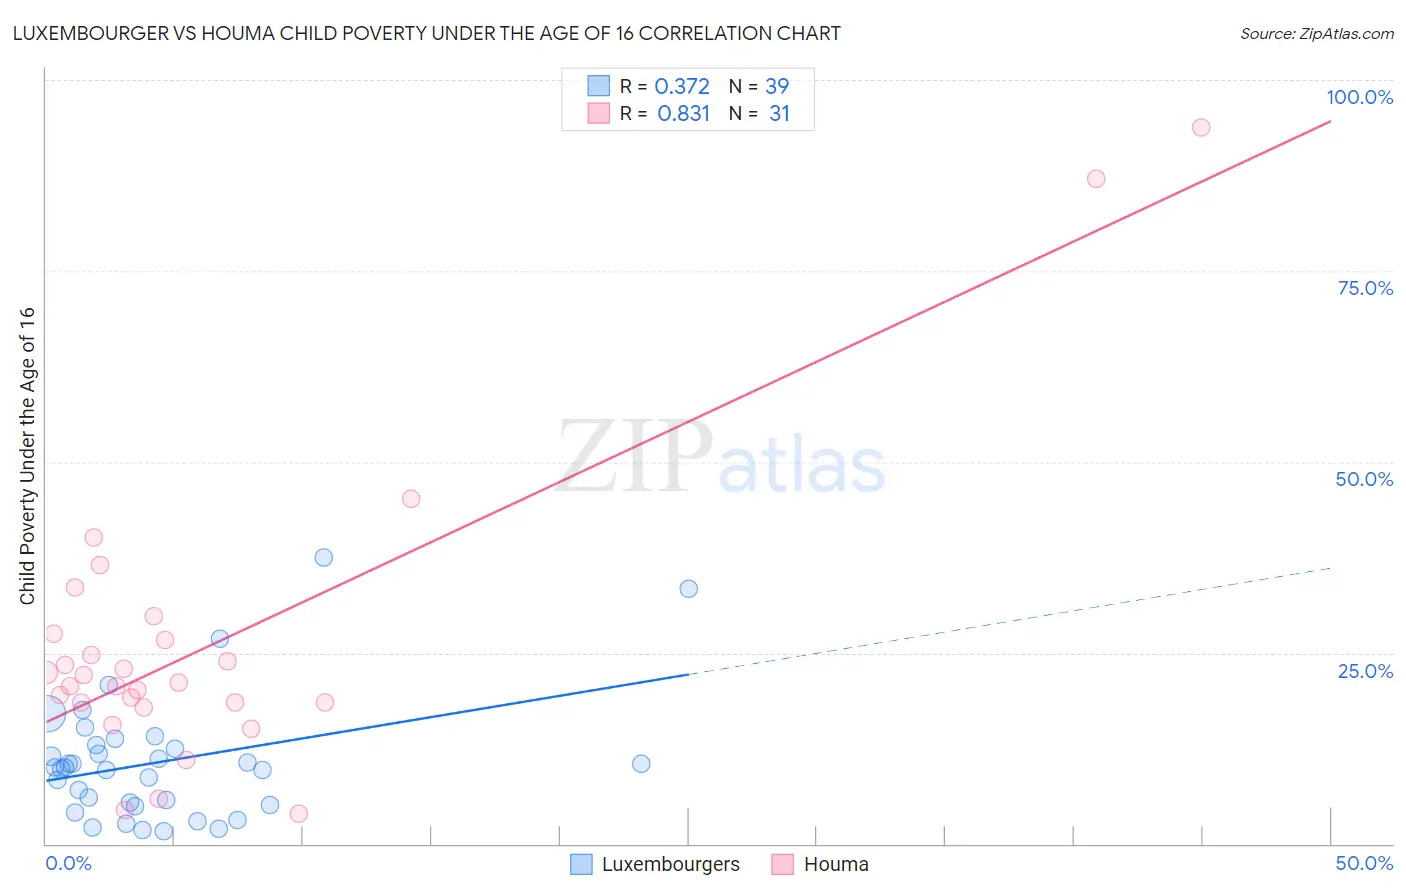 Luxembourger vs Houma Child Poverty Under the Age of 16